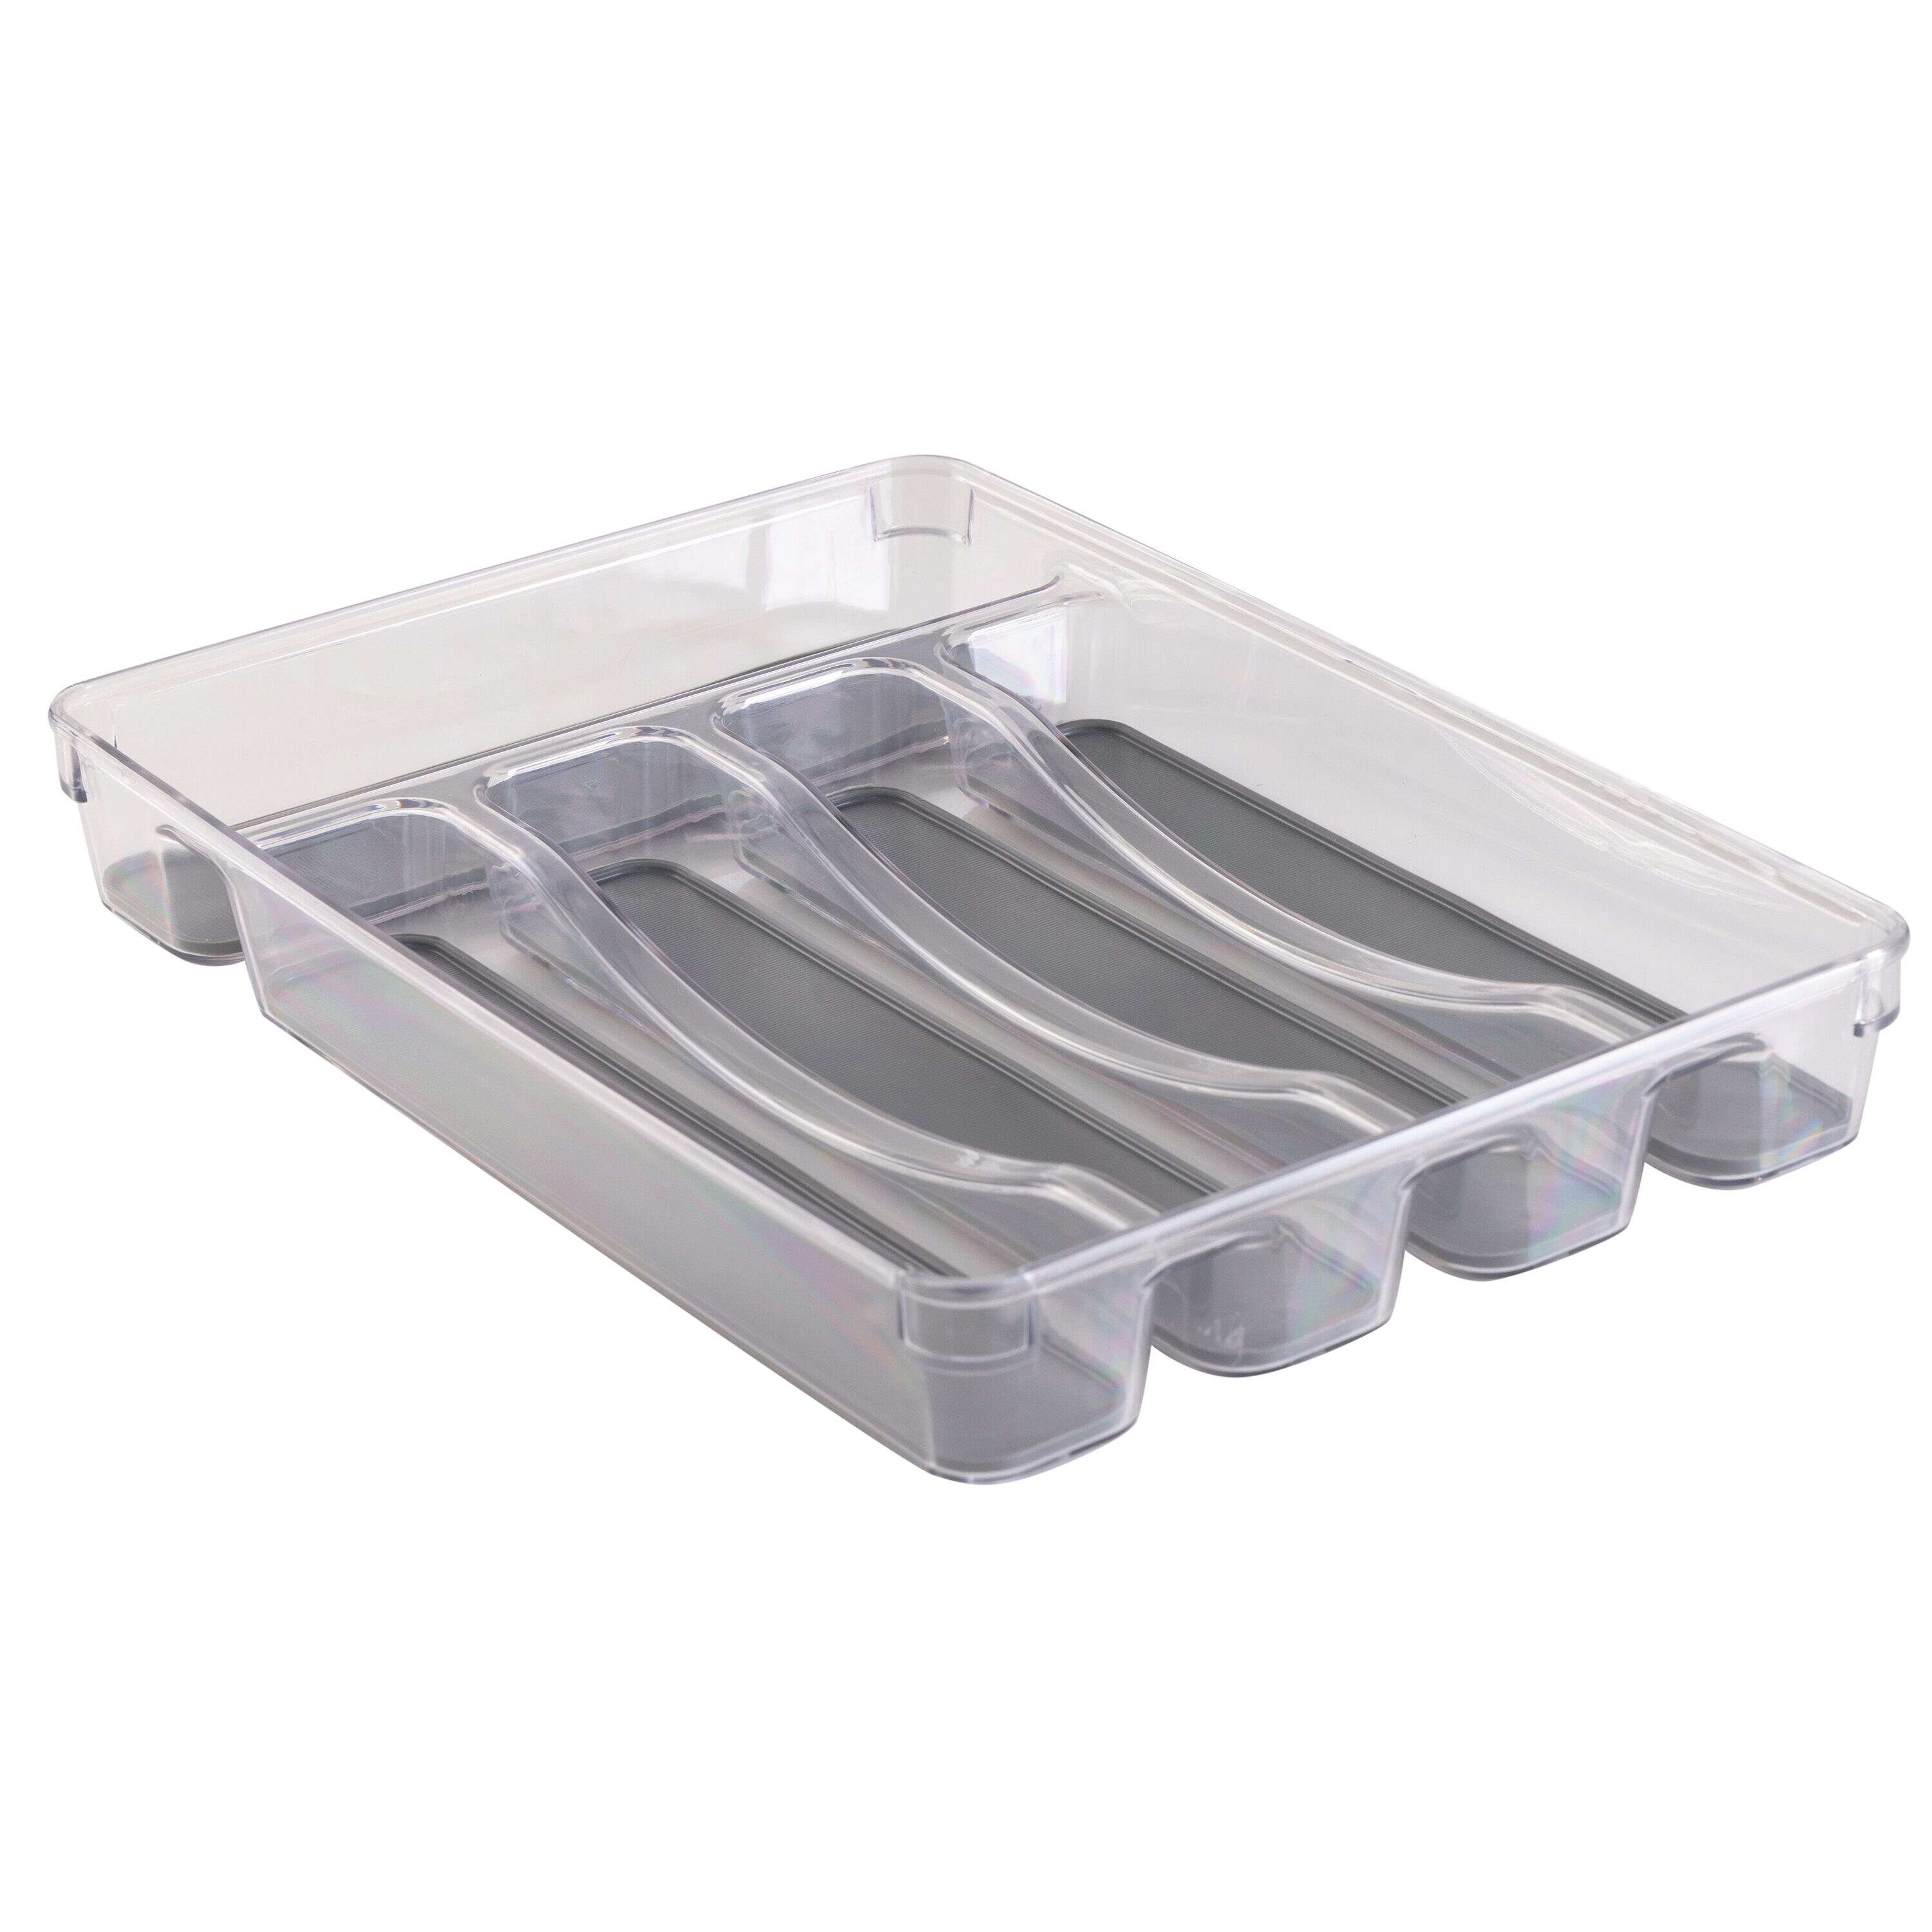 Kitchen Details 5 Compartment Cutlery Tray